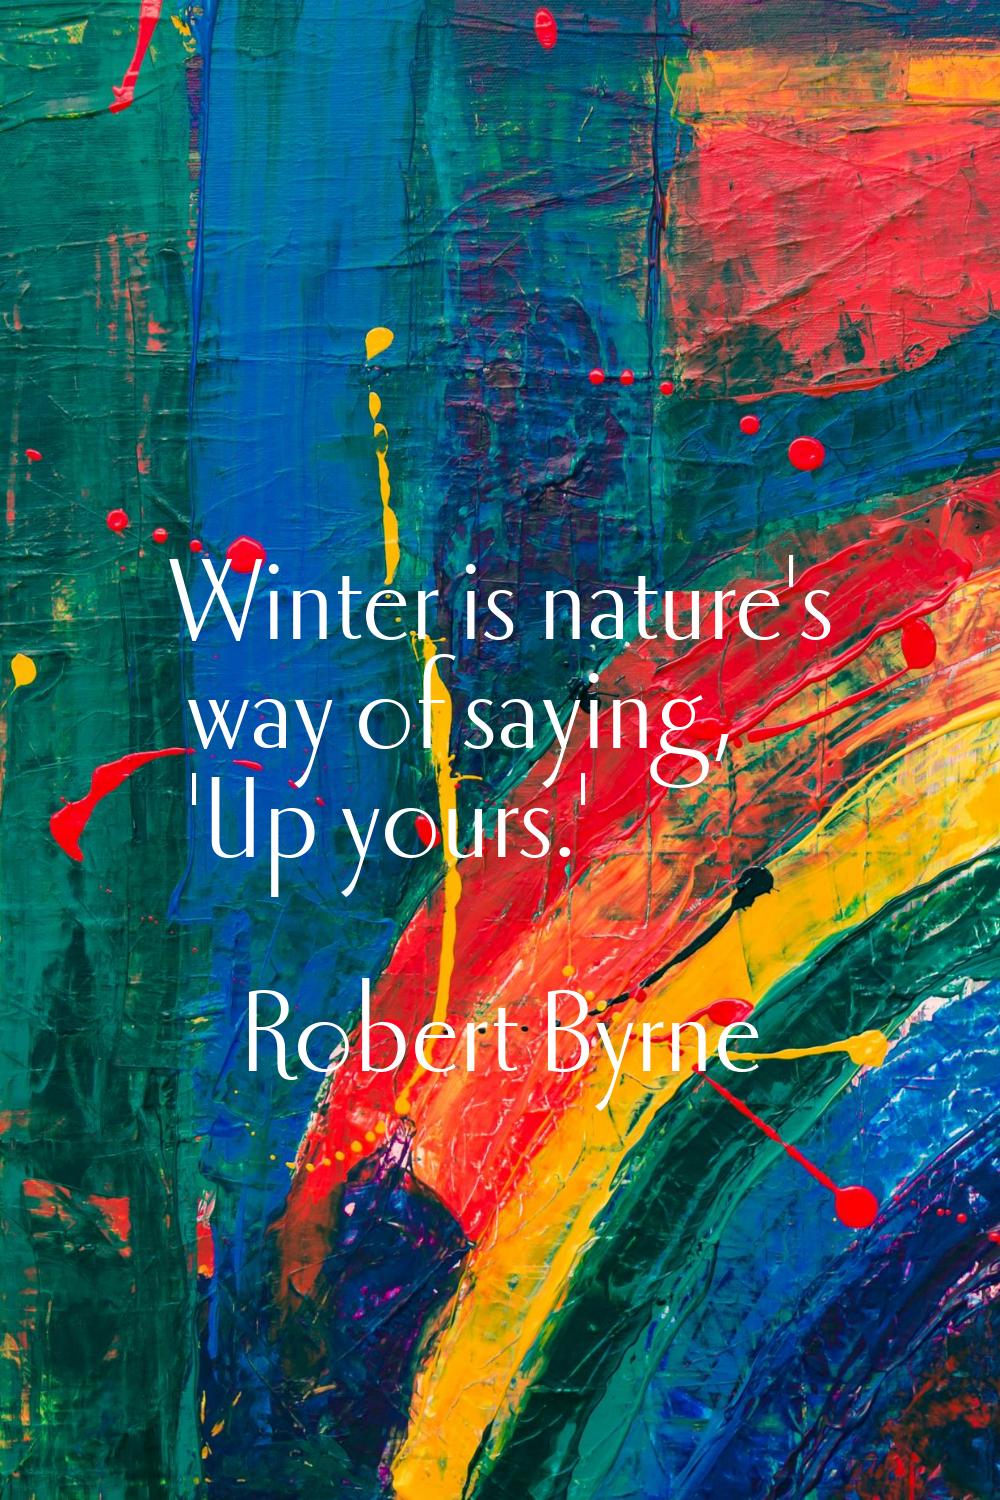 Winter is nature's way of saying, 'Up yours.'